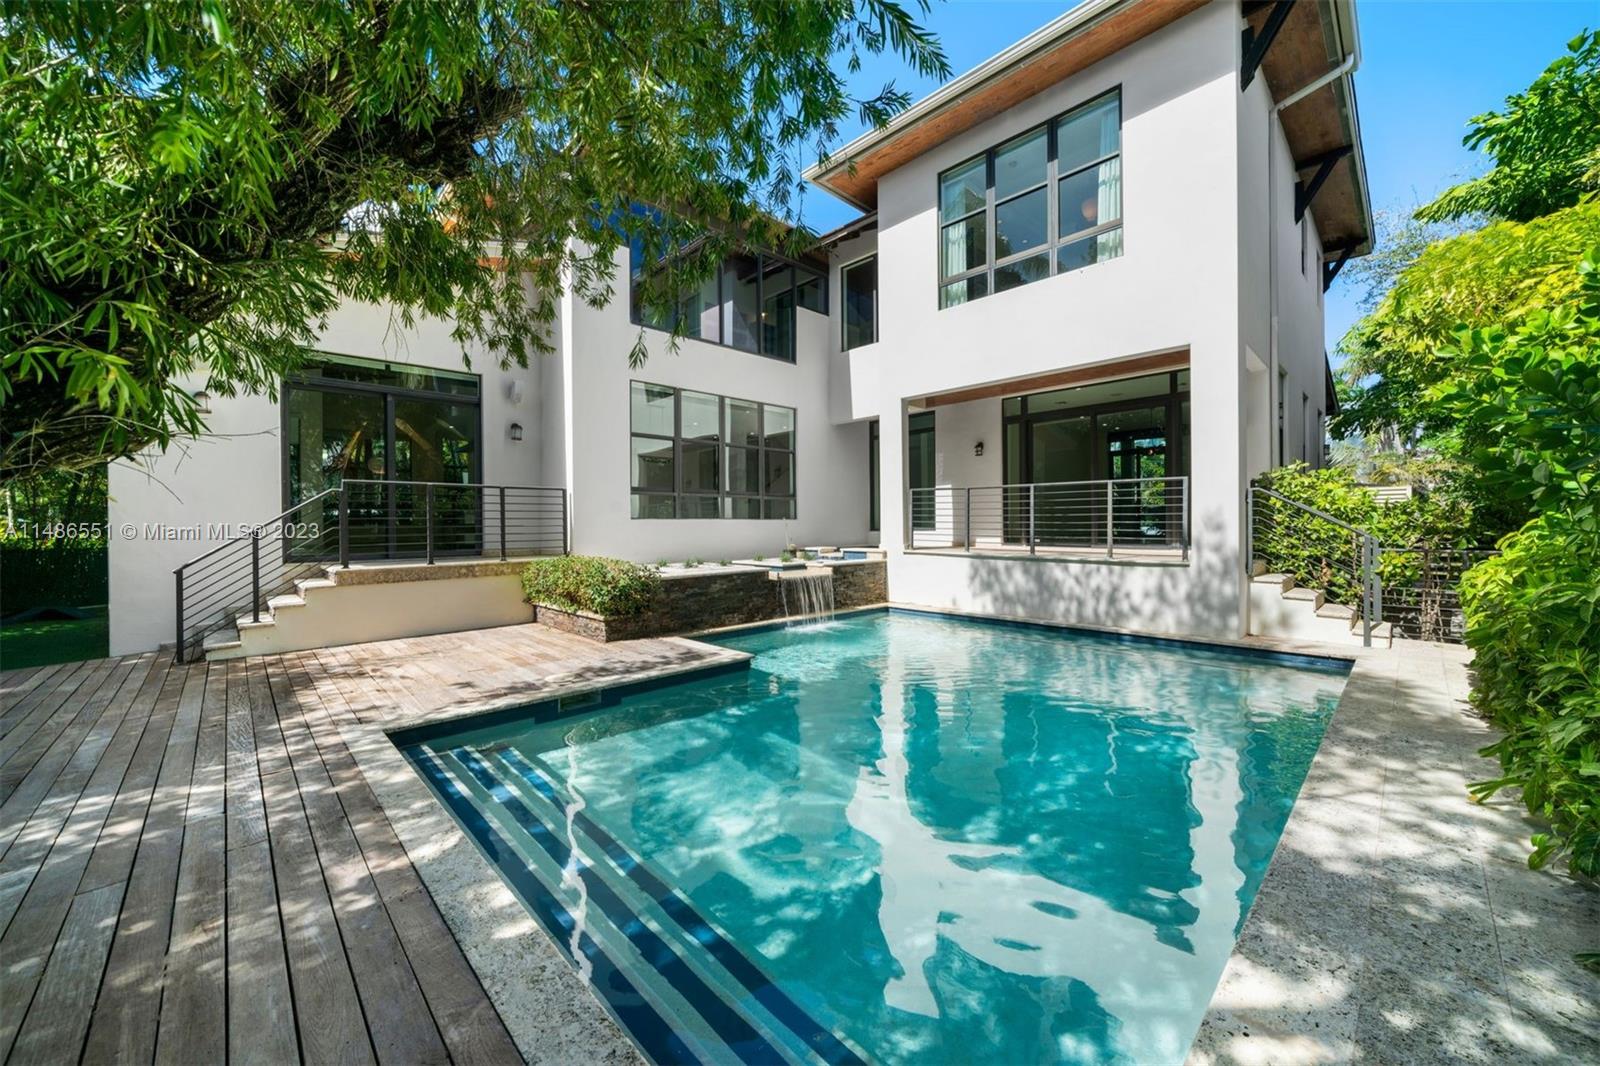 Enjoy living in this private oasis on the exclusive island of Key Biscayne. This 5 BD, 5.5 BA residence offers 4,871 SF of modern elegance. Upon entry, one is greeted by double-height ceilings and exposed wood beams. The open floor plan features terrazzo and wood floors, impact windows and doors, and a sleek contemporary design. A gourmet kitchen boasts premium appliances, center island, wet bar, and custom floor-to-ceiling cabinetry. The sizable principal suite offers views of the backyard and a spa-like bathroom. Manicured landscaping surrounds the pool, jacuzzi, expansive terrace, and summer kitchen. Experience the epitome of island living, with convenient access to schools, parks, community center, restaurants & beaches.